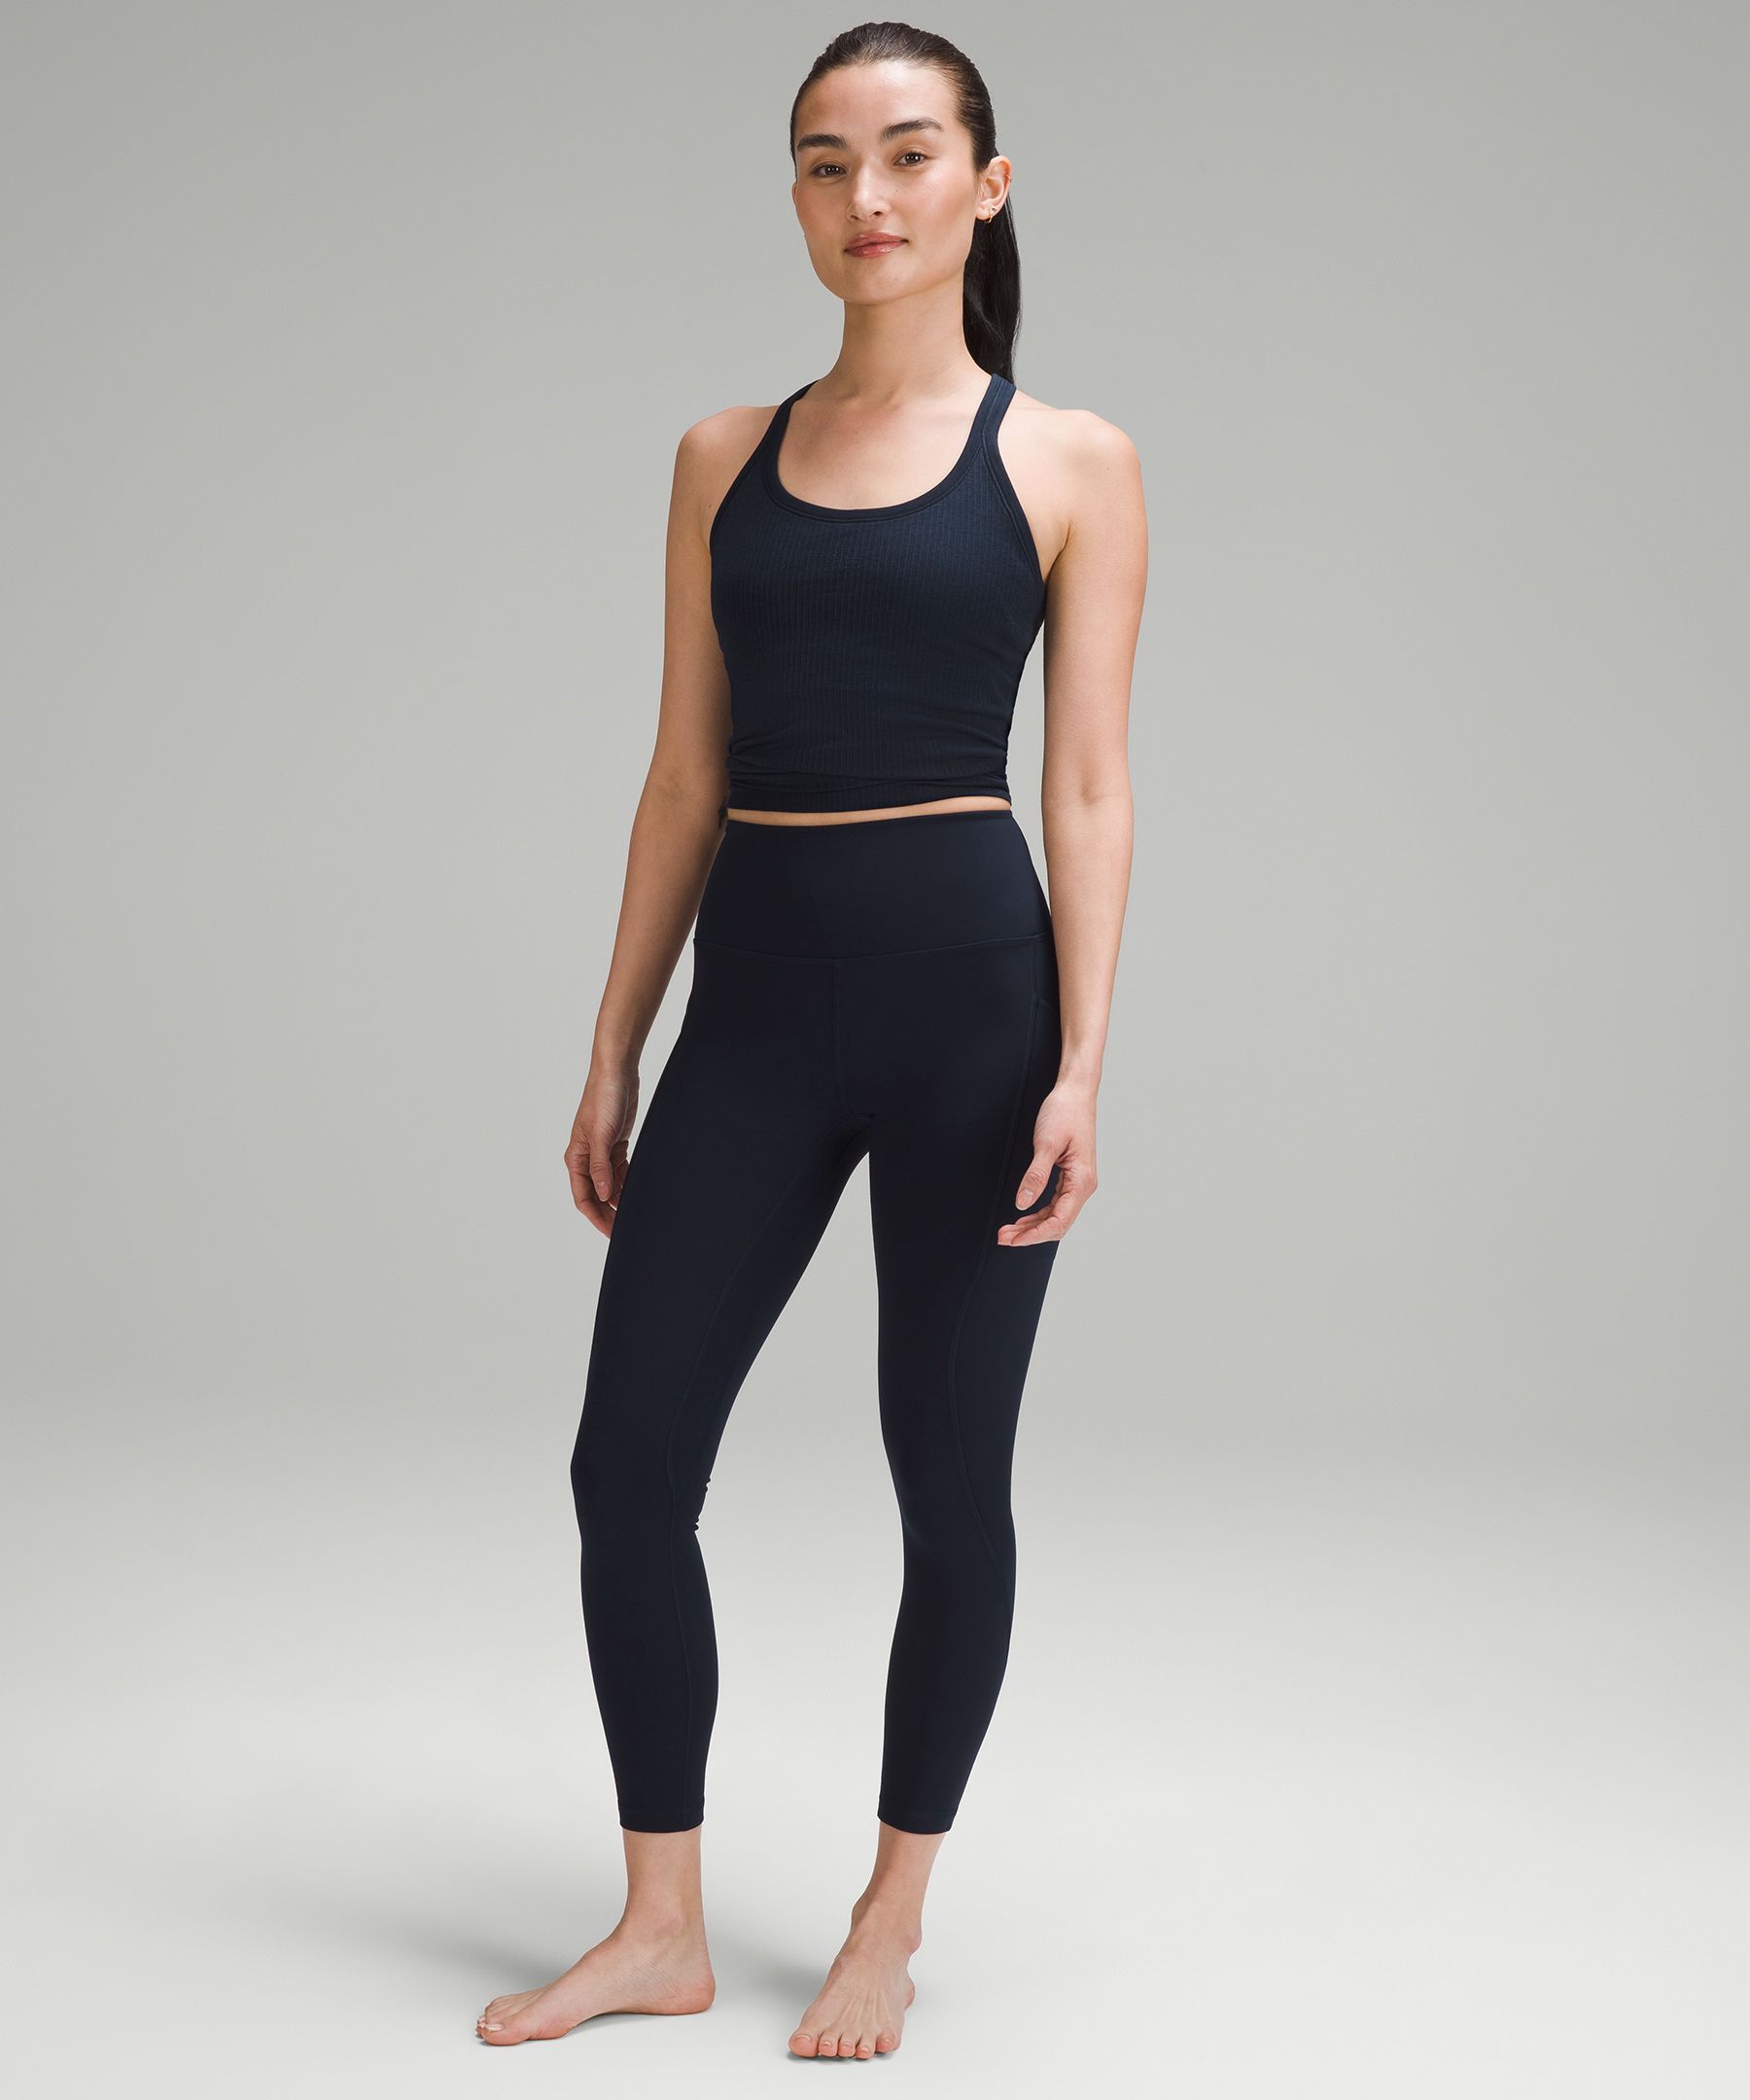 LULULEMON Fast and Free 7/8 Tight 25 (Black (Non-Reflective), 6